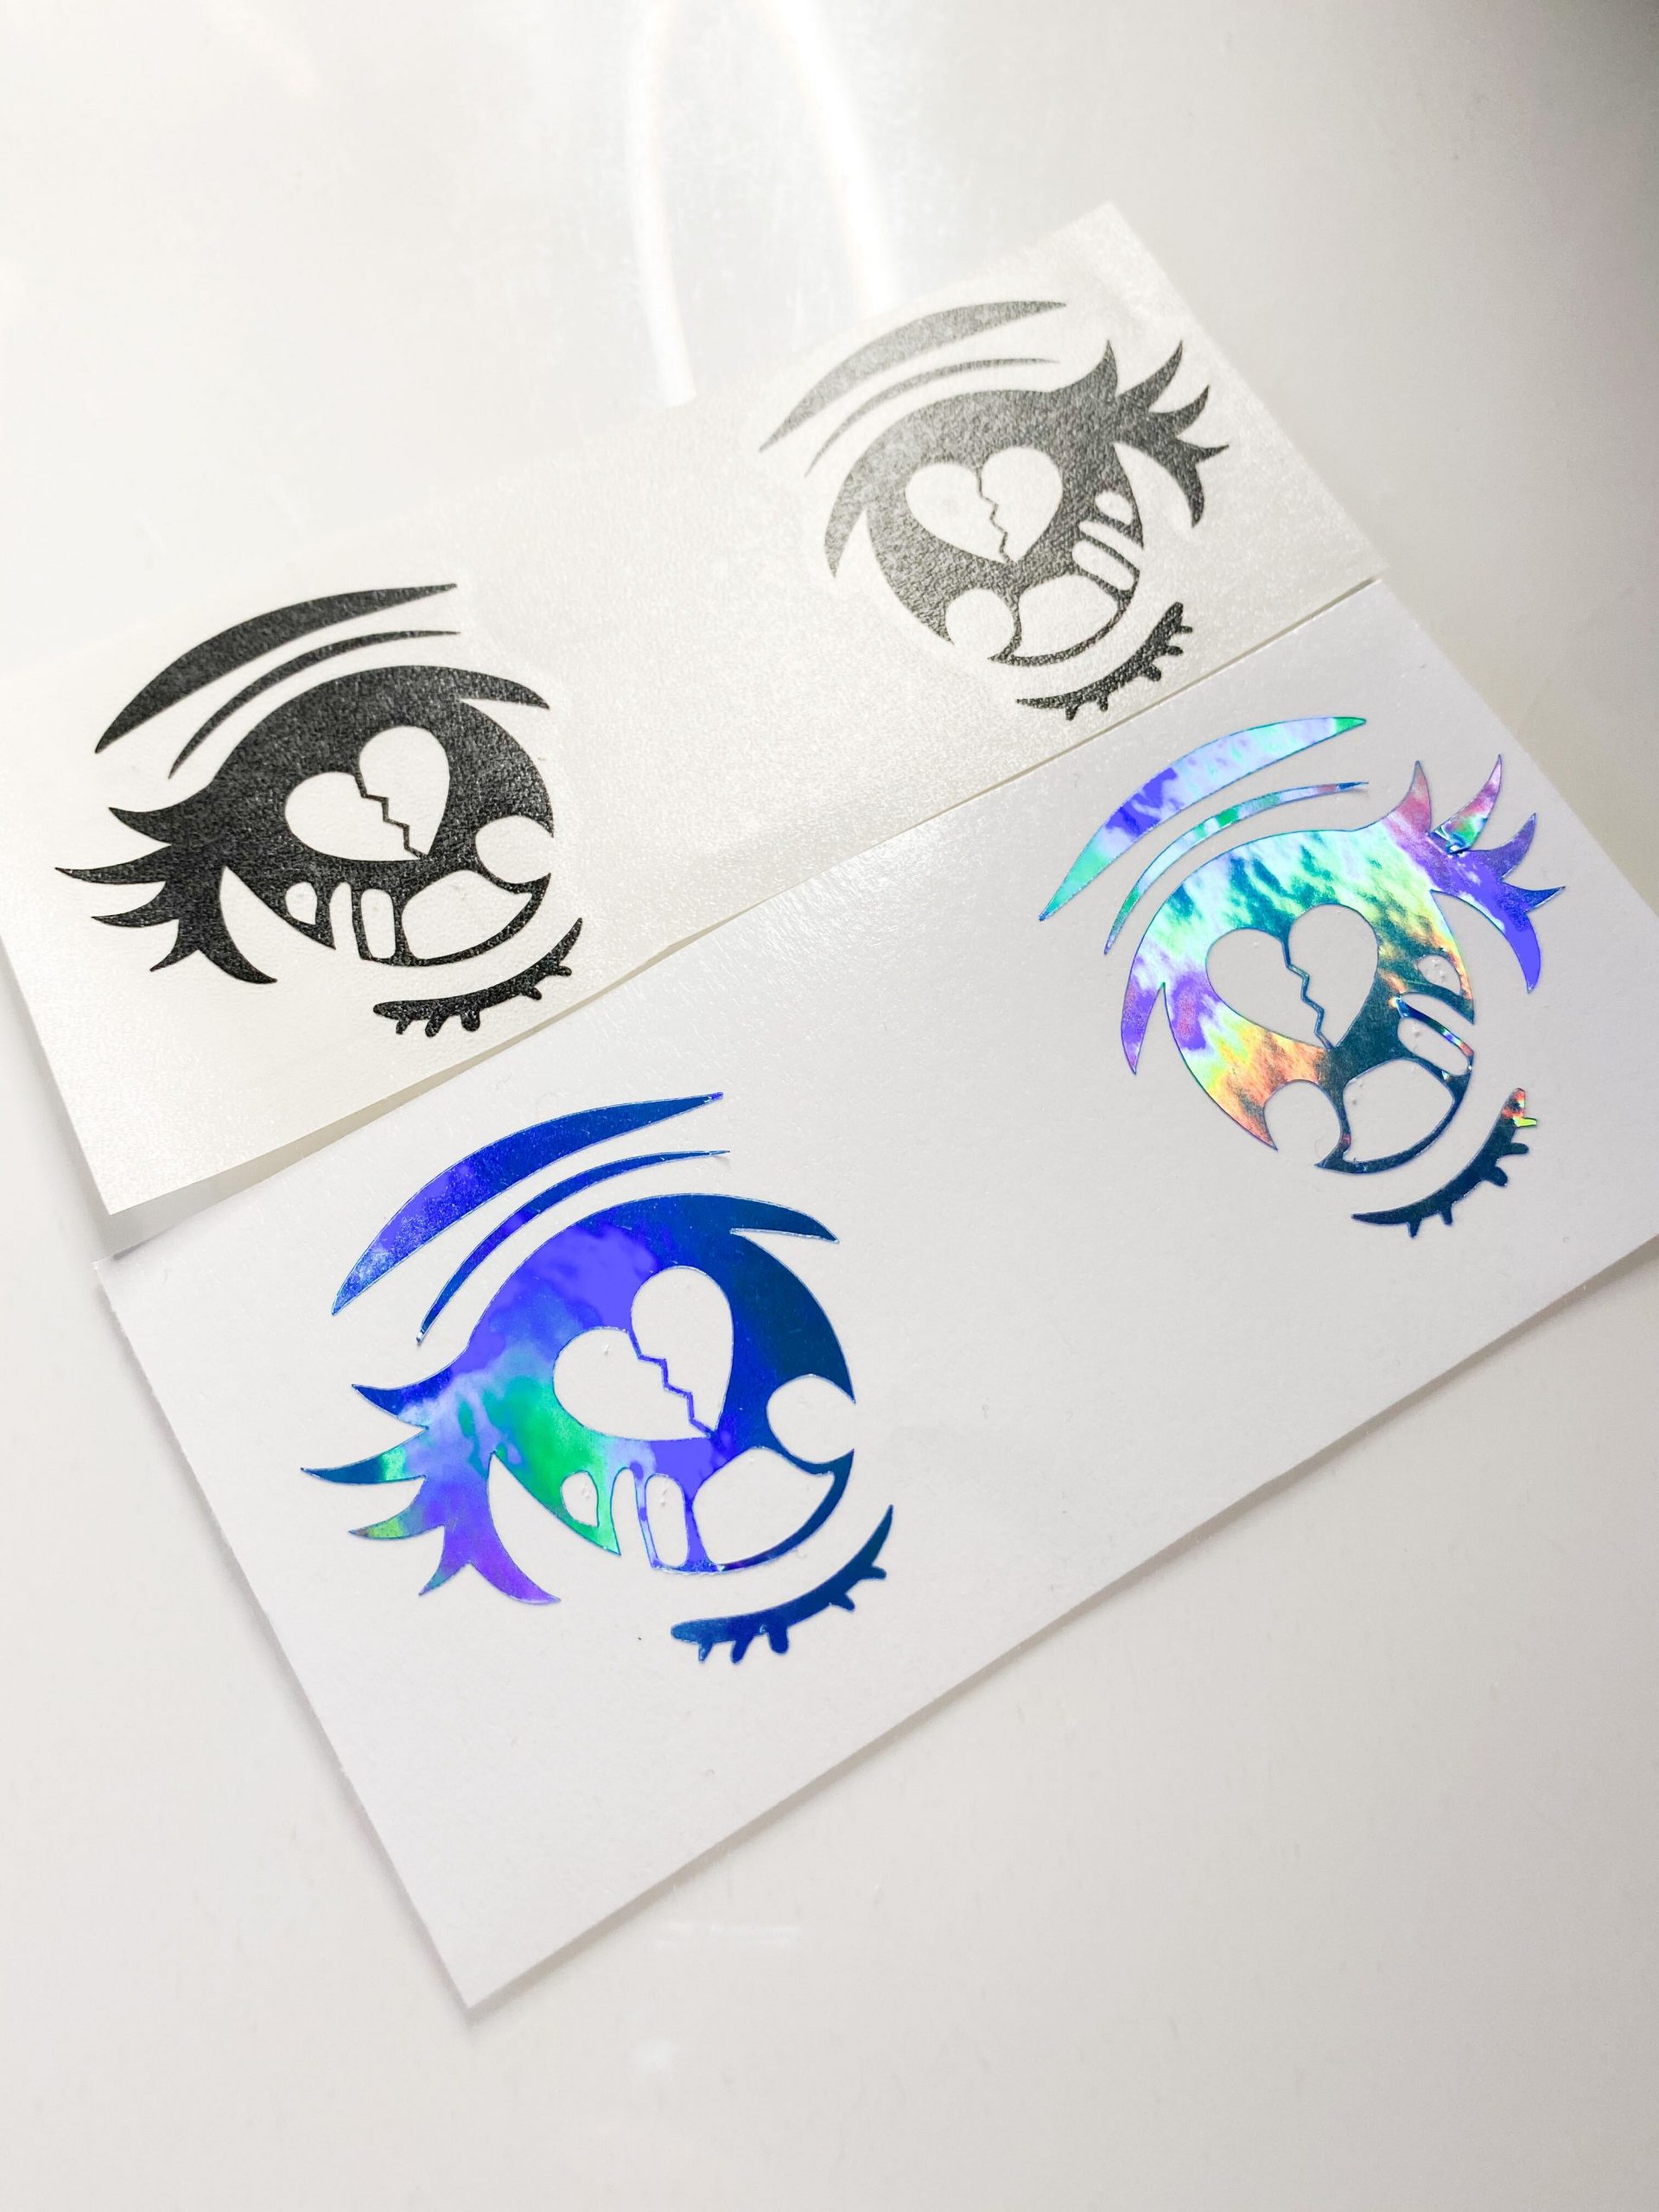 Holographic Credit Card Sticker Skin Cover/Debit Cards Stickers Anime Style  (06) : Amazon.ca: Office Products